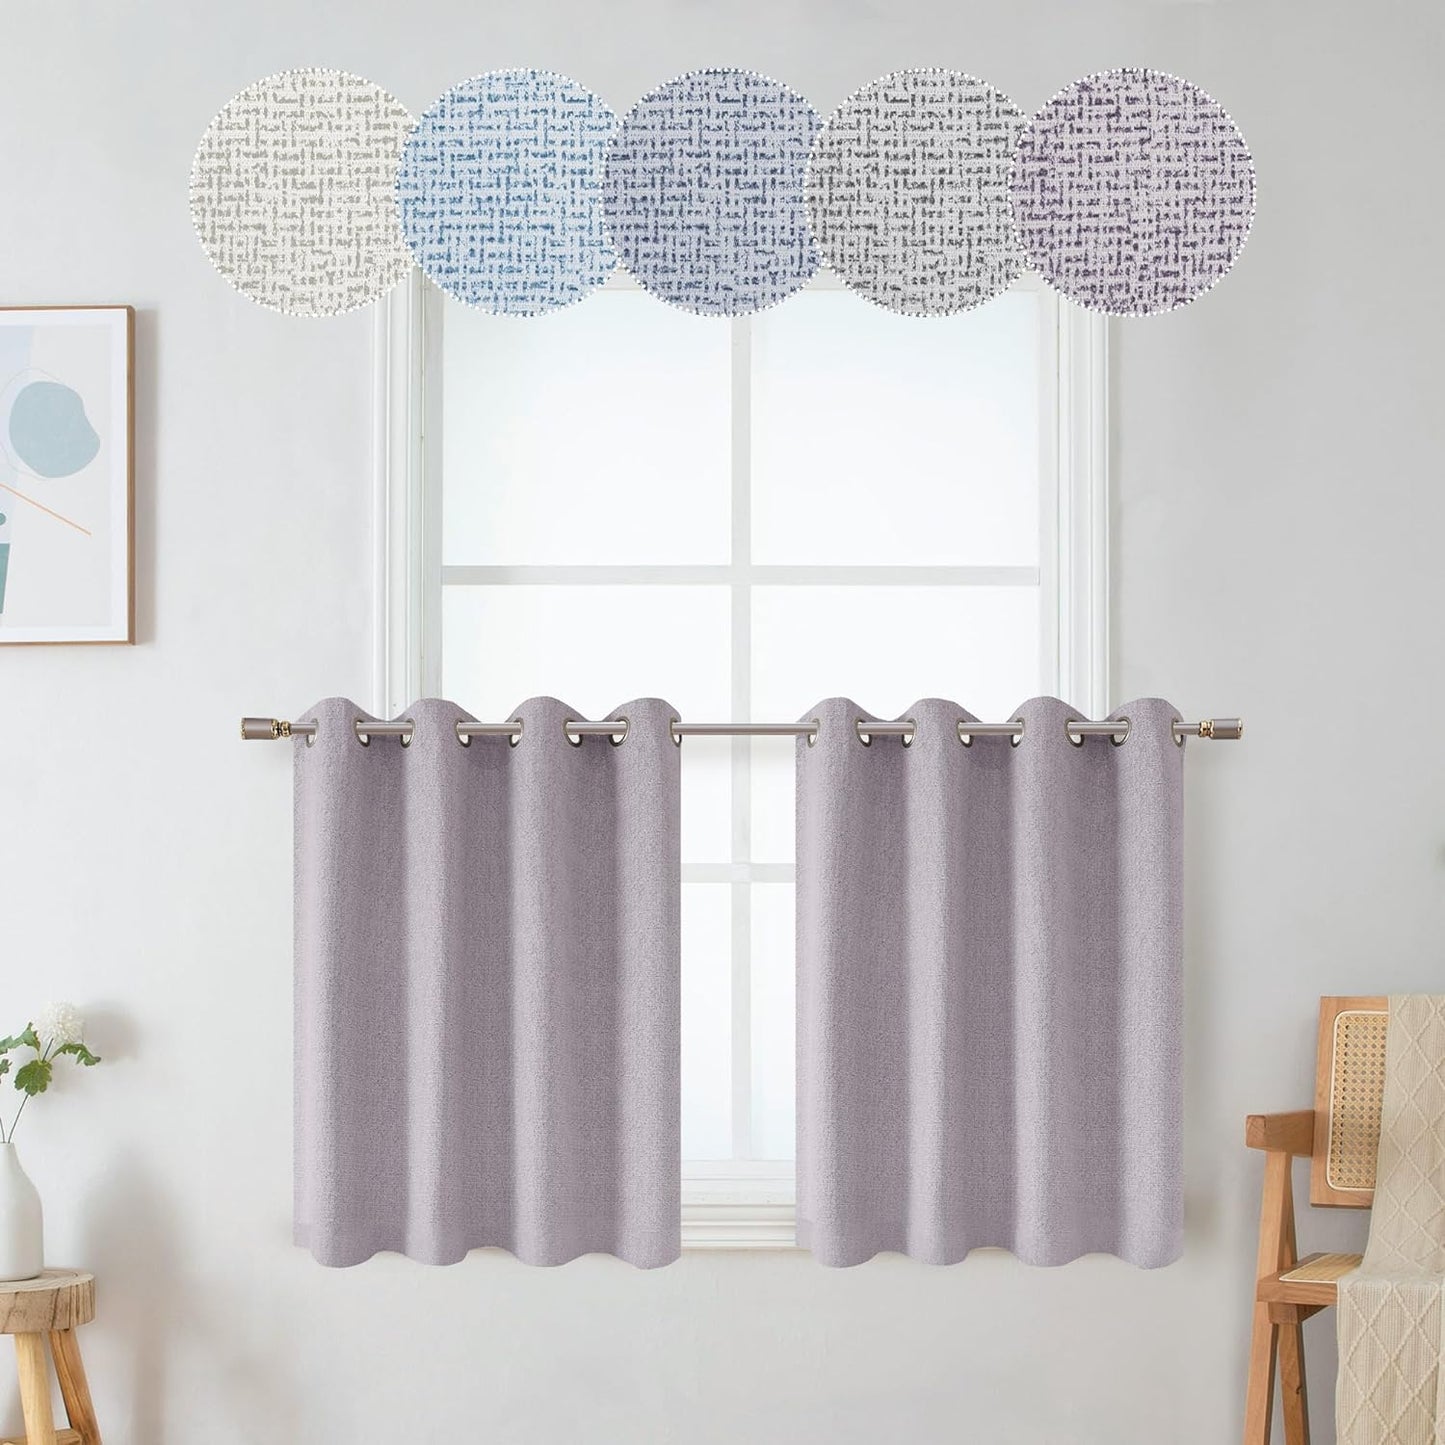 OWENIE Luke Black Out Curtains 63 Inch Long 2 Panels for Bedroom, Geometric Printed Completely Blackout Room Darkening Curtains, Grommet Thermal Insulated Living Room Curtain, 2 PCS, Each 42Wx63L Inch  OWENIE Purple 42"W X 24"L | 2 Pcs 